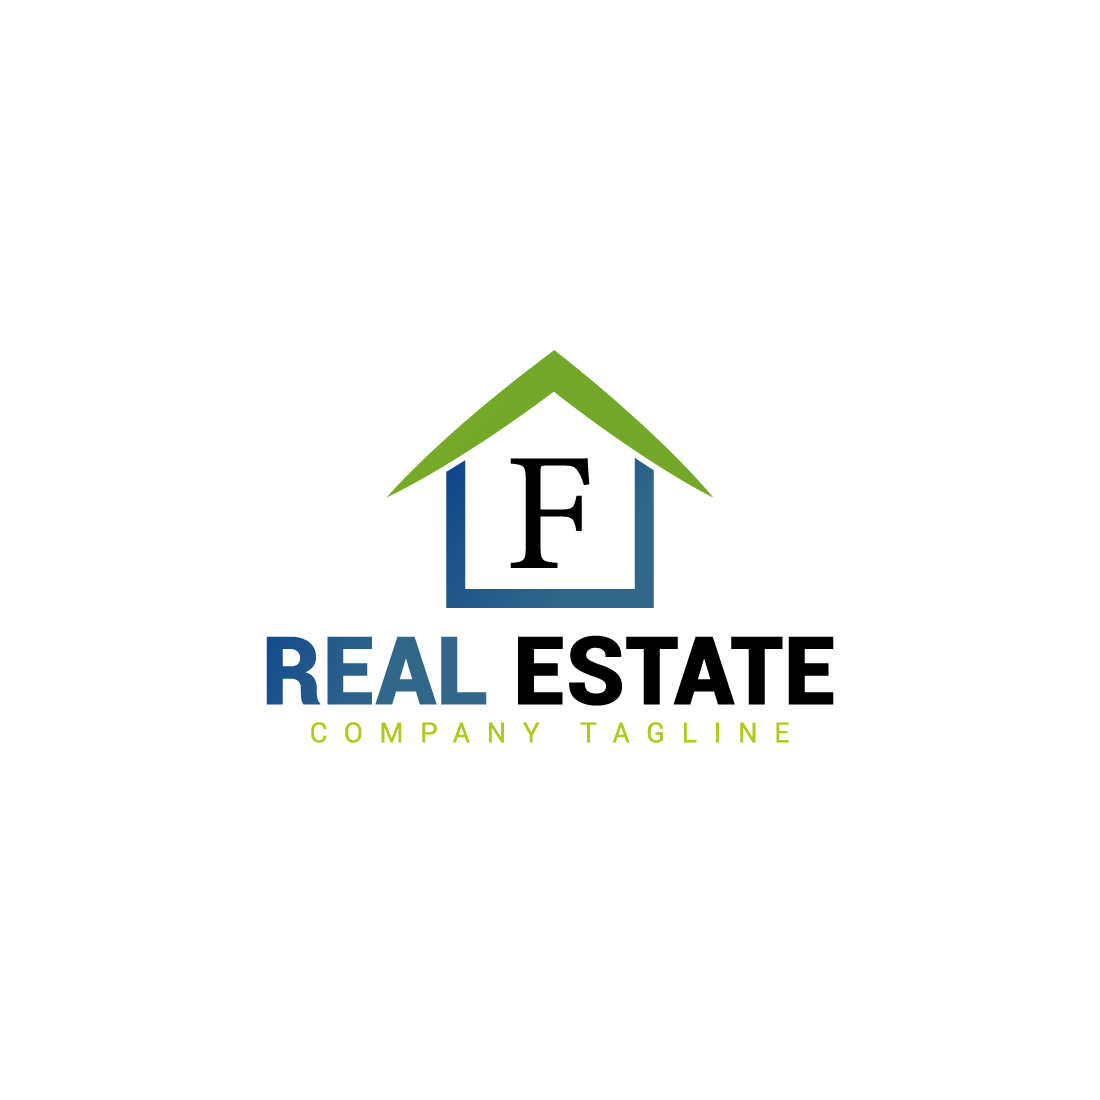 Real estate logo with green, dark blue color and F letter preview image.